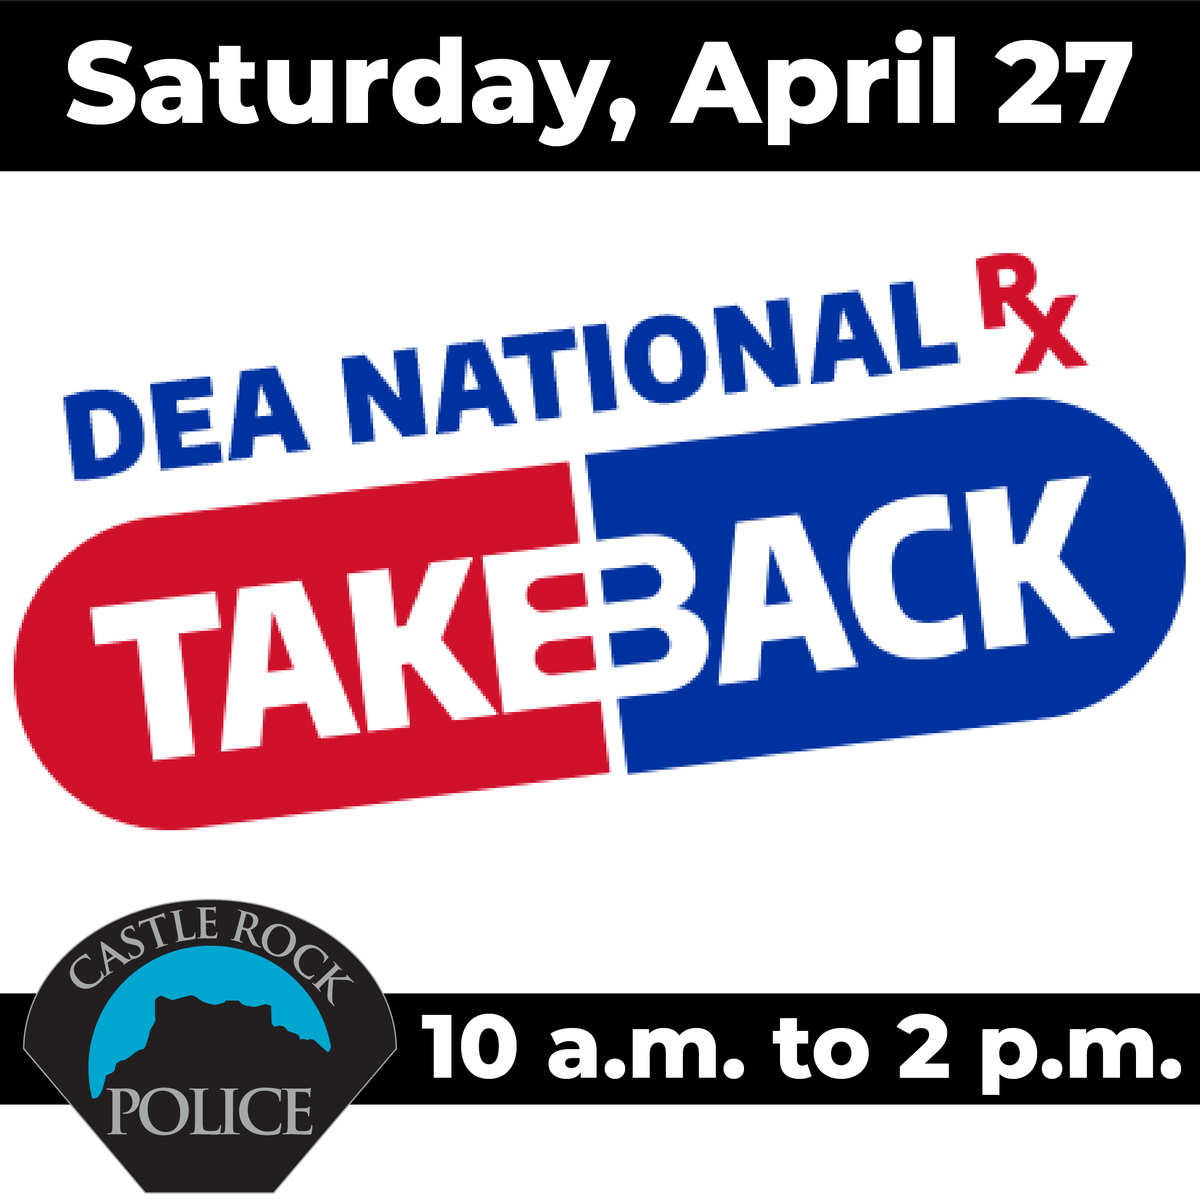 Let the Castle Rock Police Department help you with your spring-cleaning efforts... CRPD is taking part in the DEA's National Prescription Drug Take Back event! Join us Saturday, April 27, from 10 a.m. to 2 p.m. For event details and FAQs, please visit crgov.com/CivicAlerts.as….